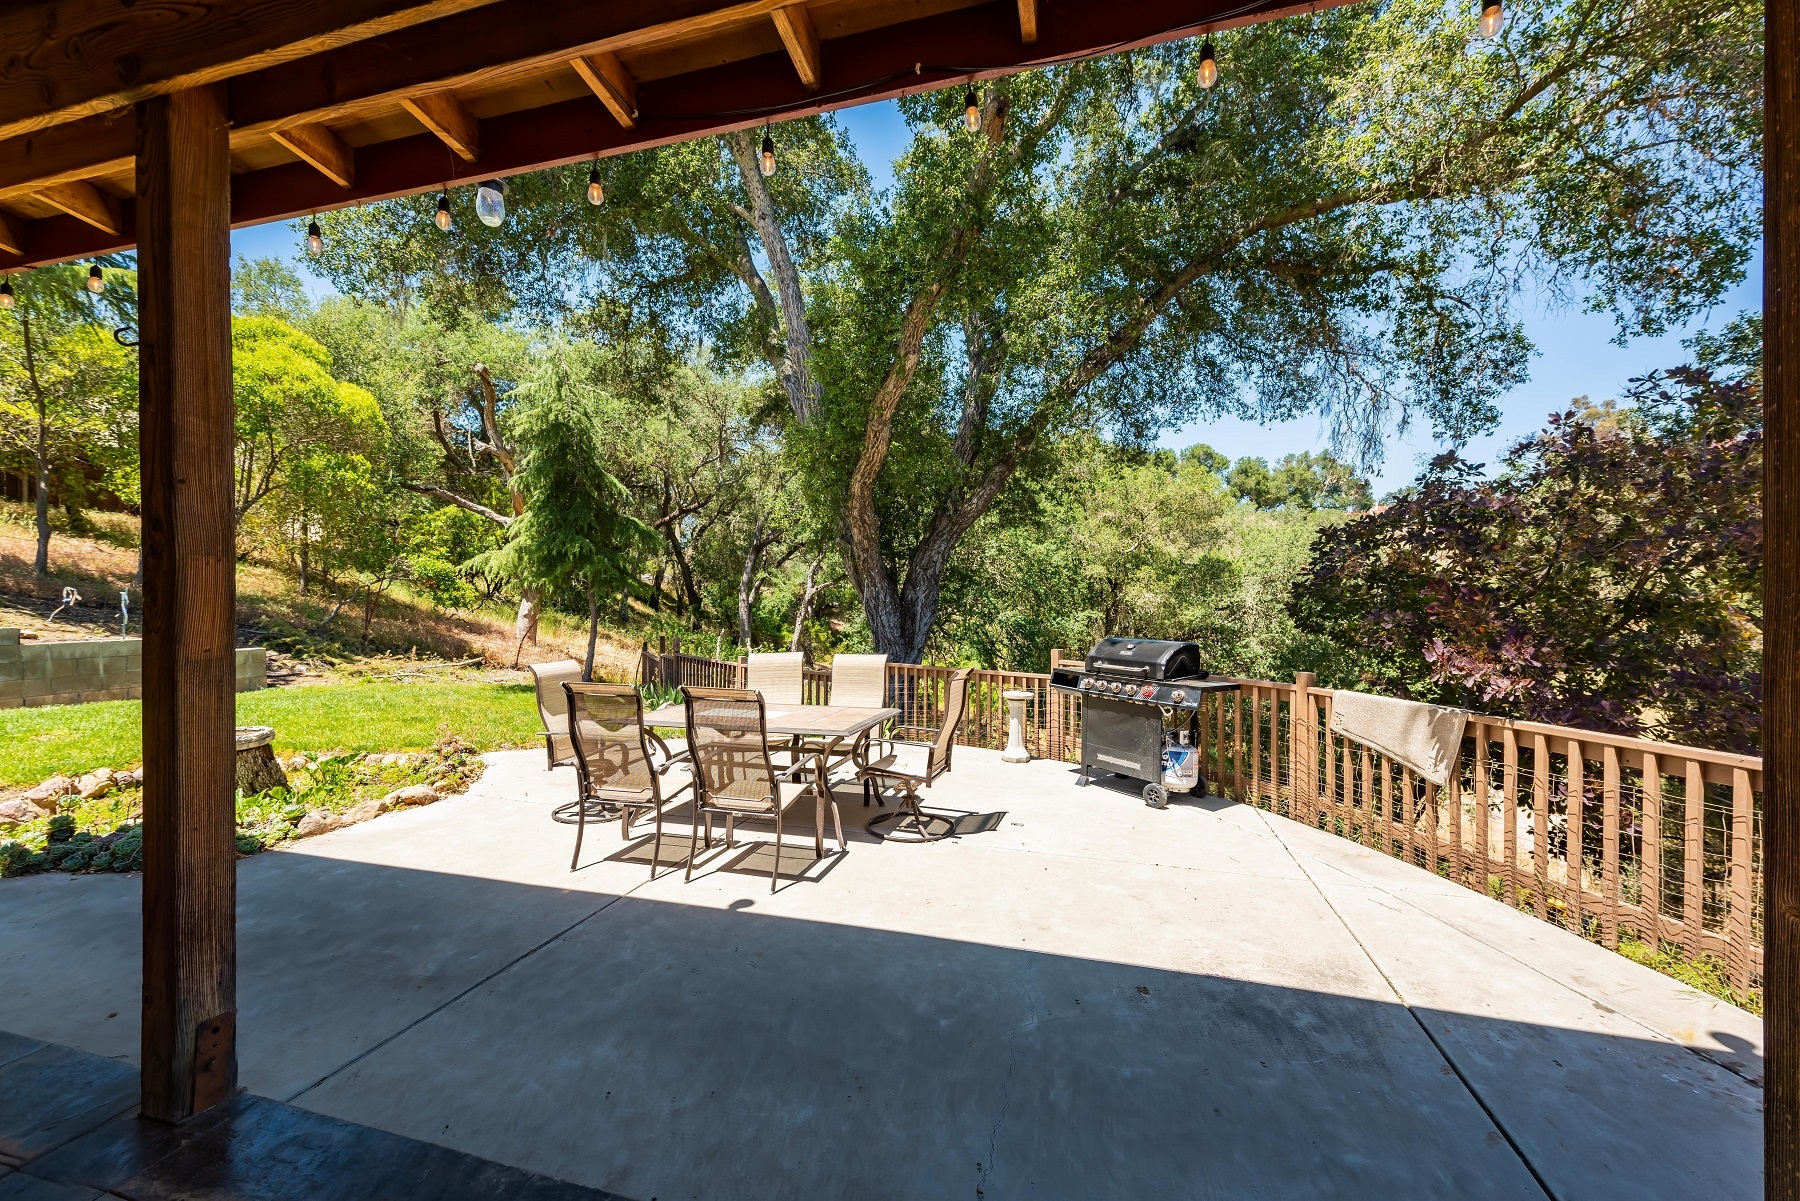 Enjoy the privacy and majestic hillside and tree views.